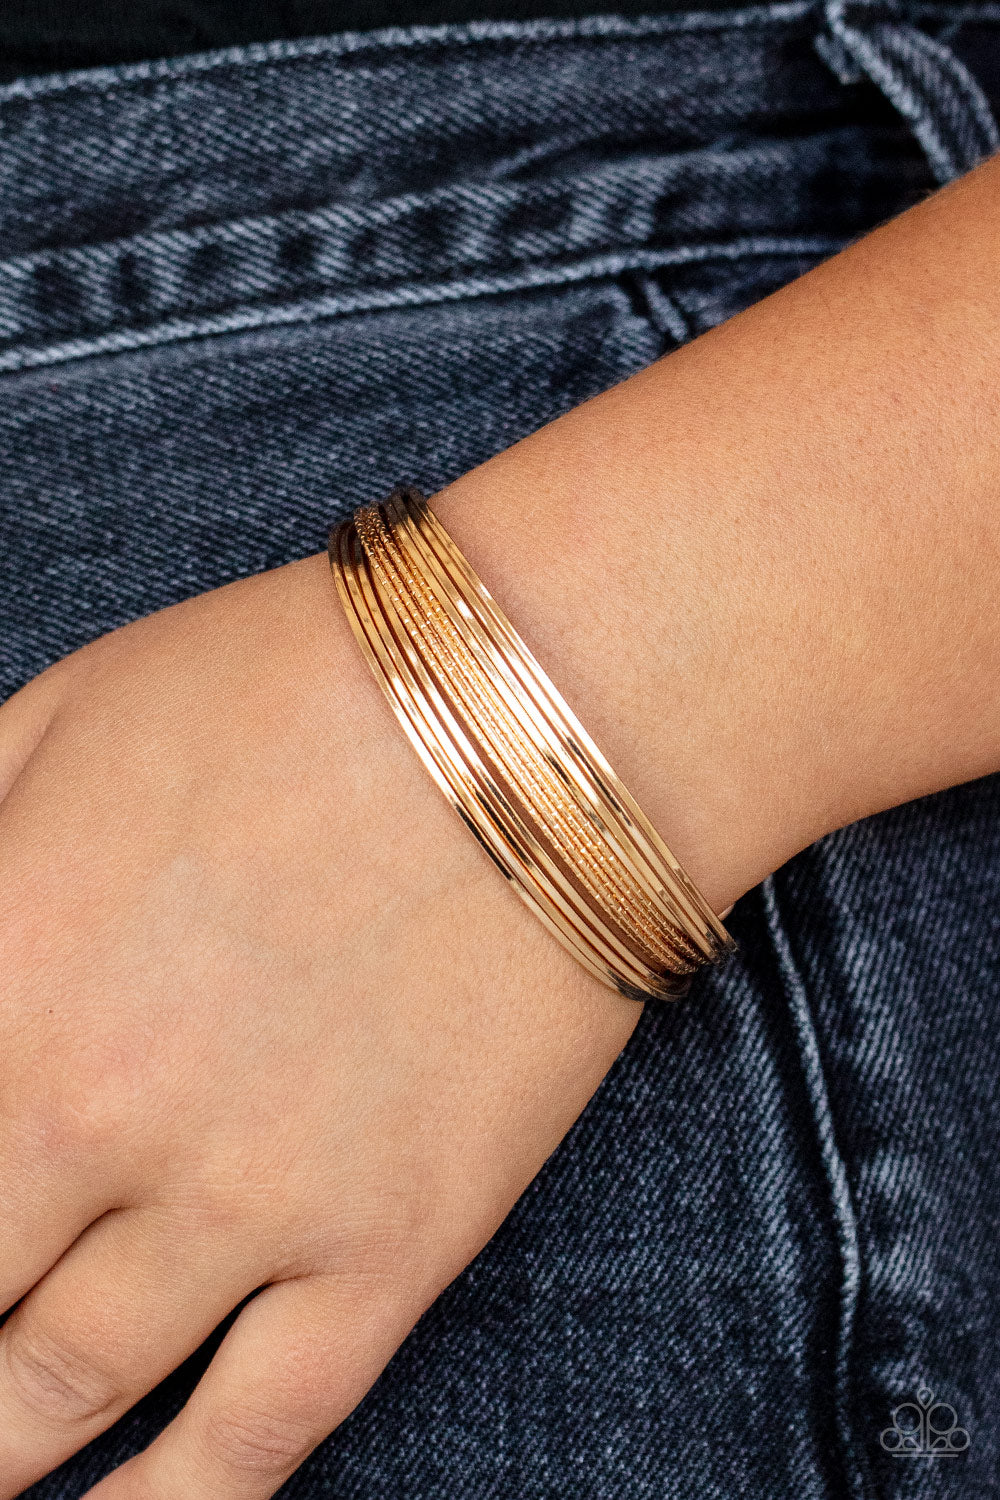 This Girl is on WIRE Gold Bracelet